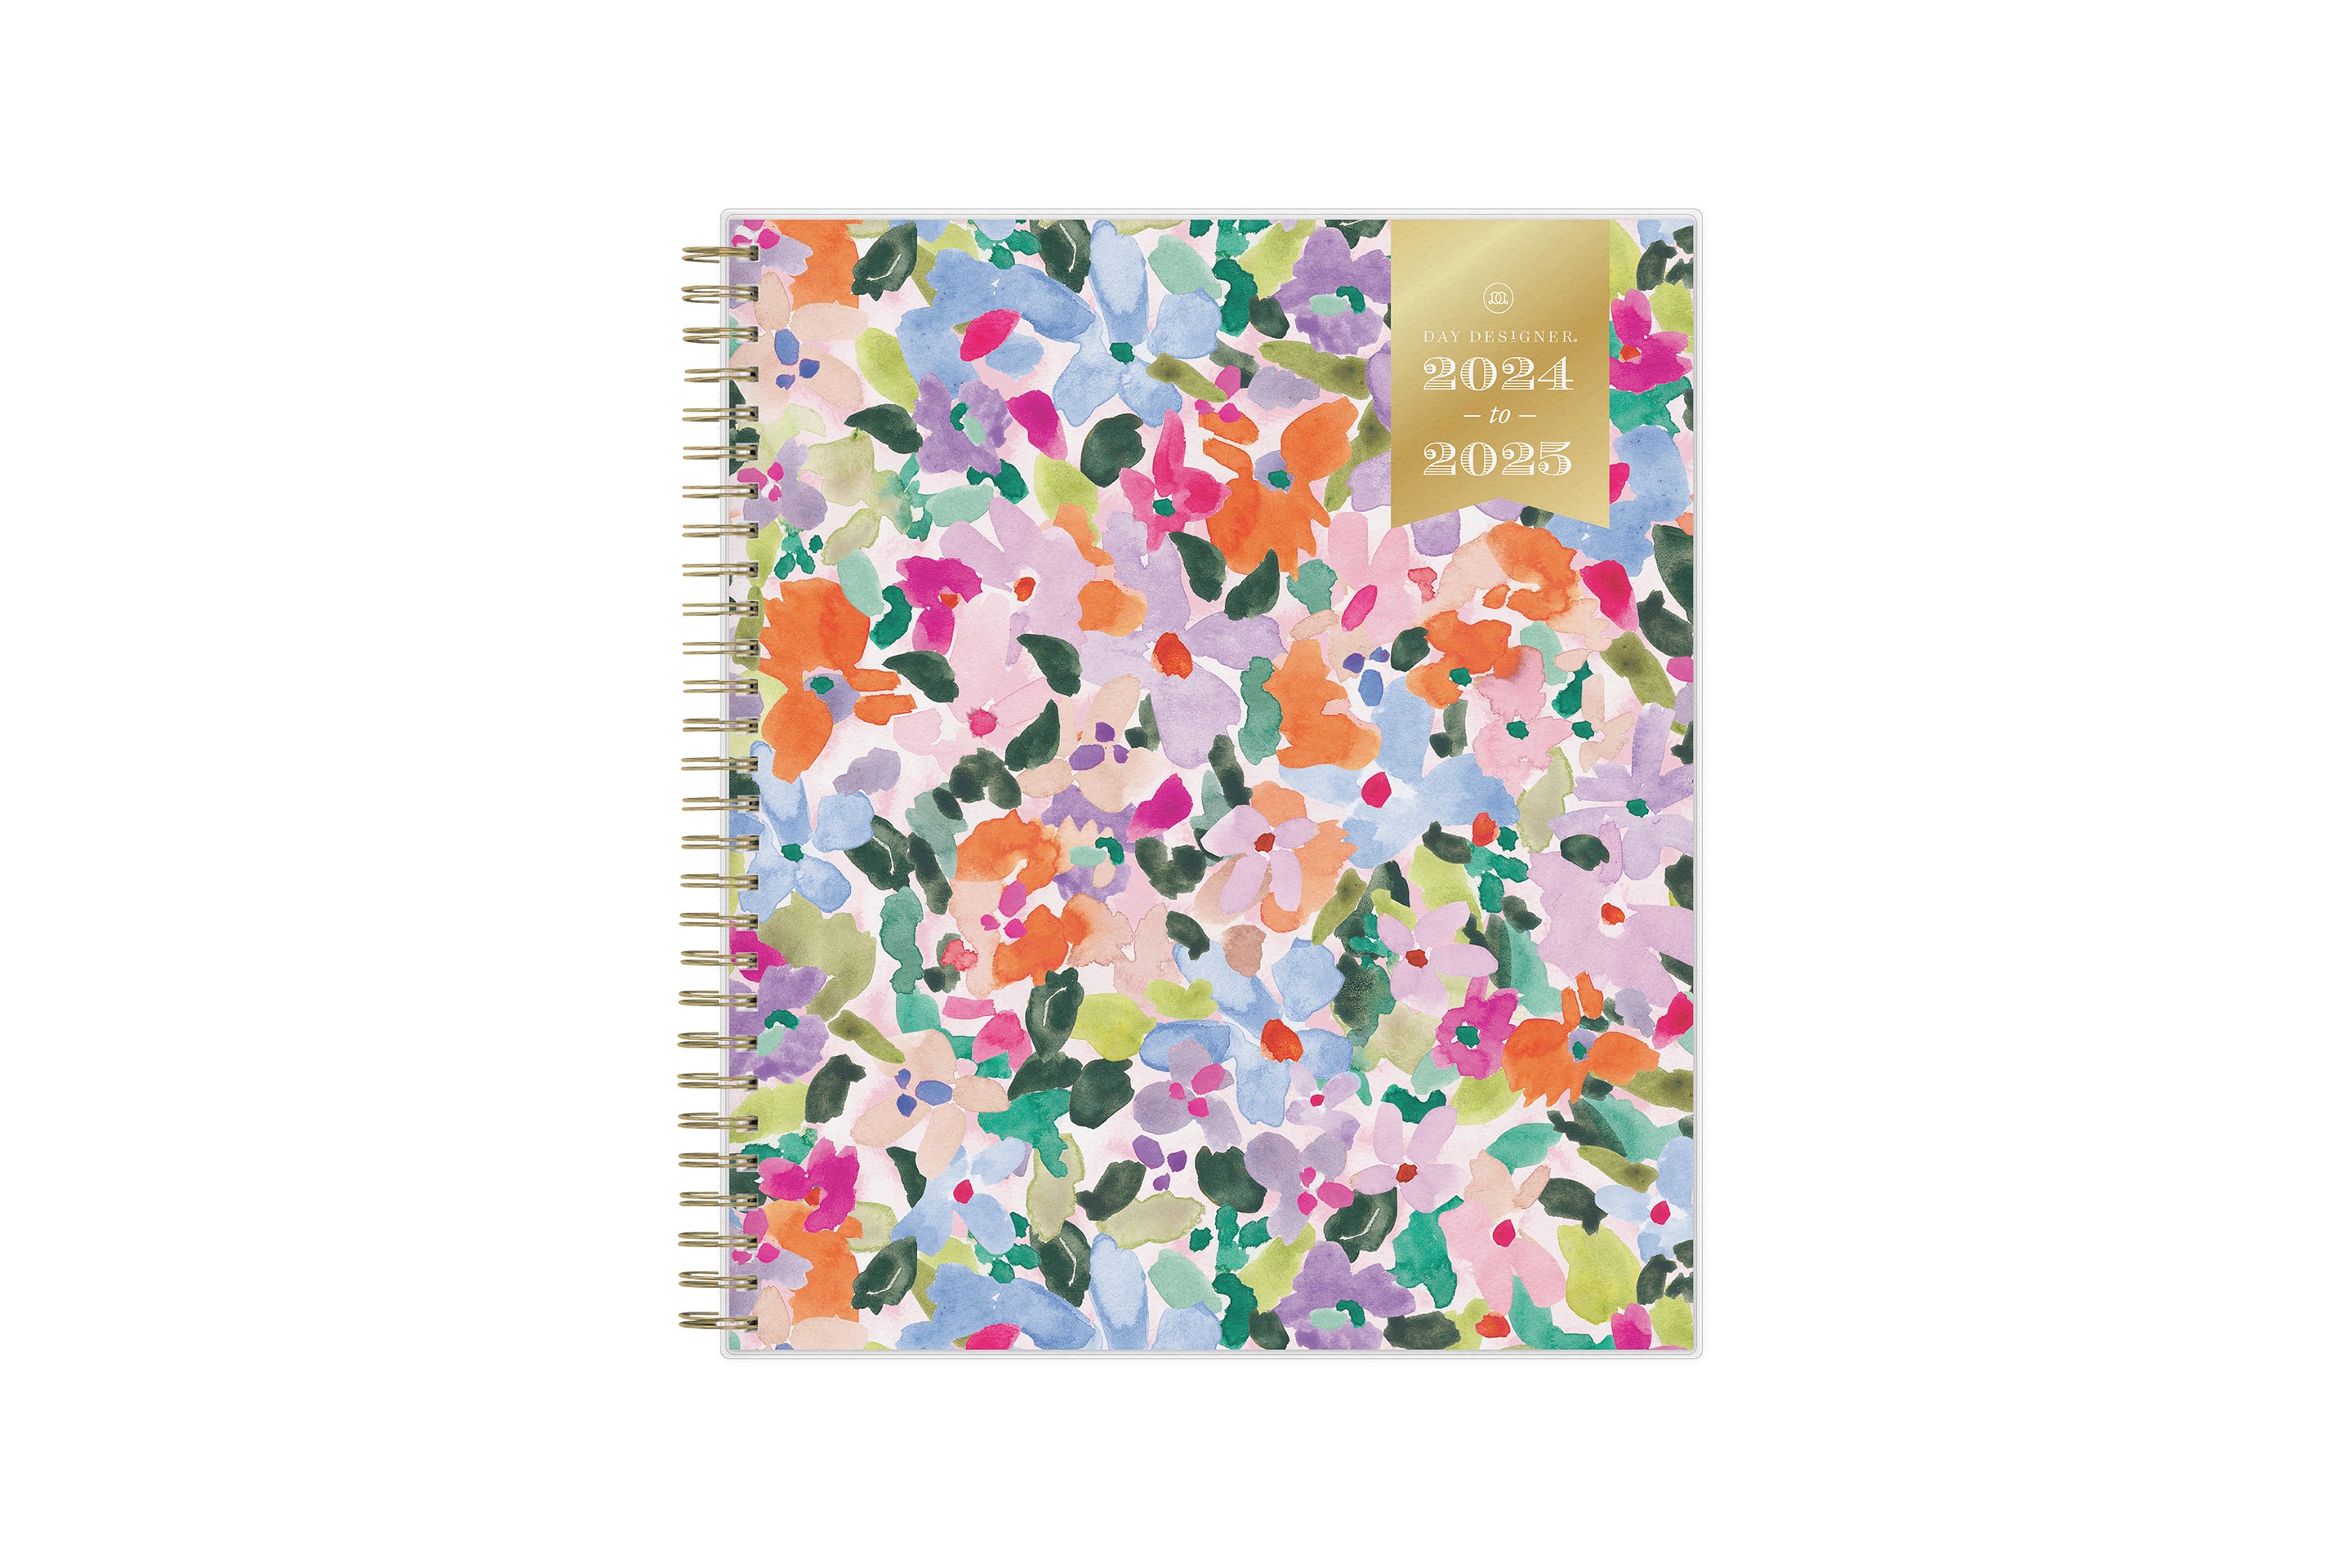 monthly day designer planner in 8x10 planner size with brushed florals